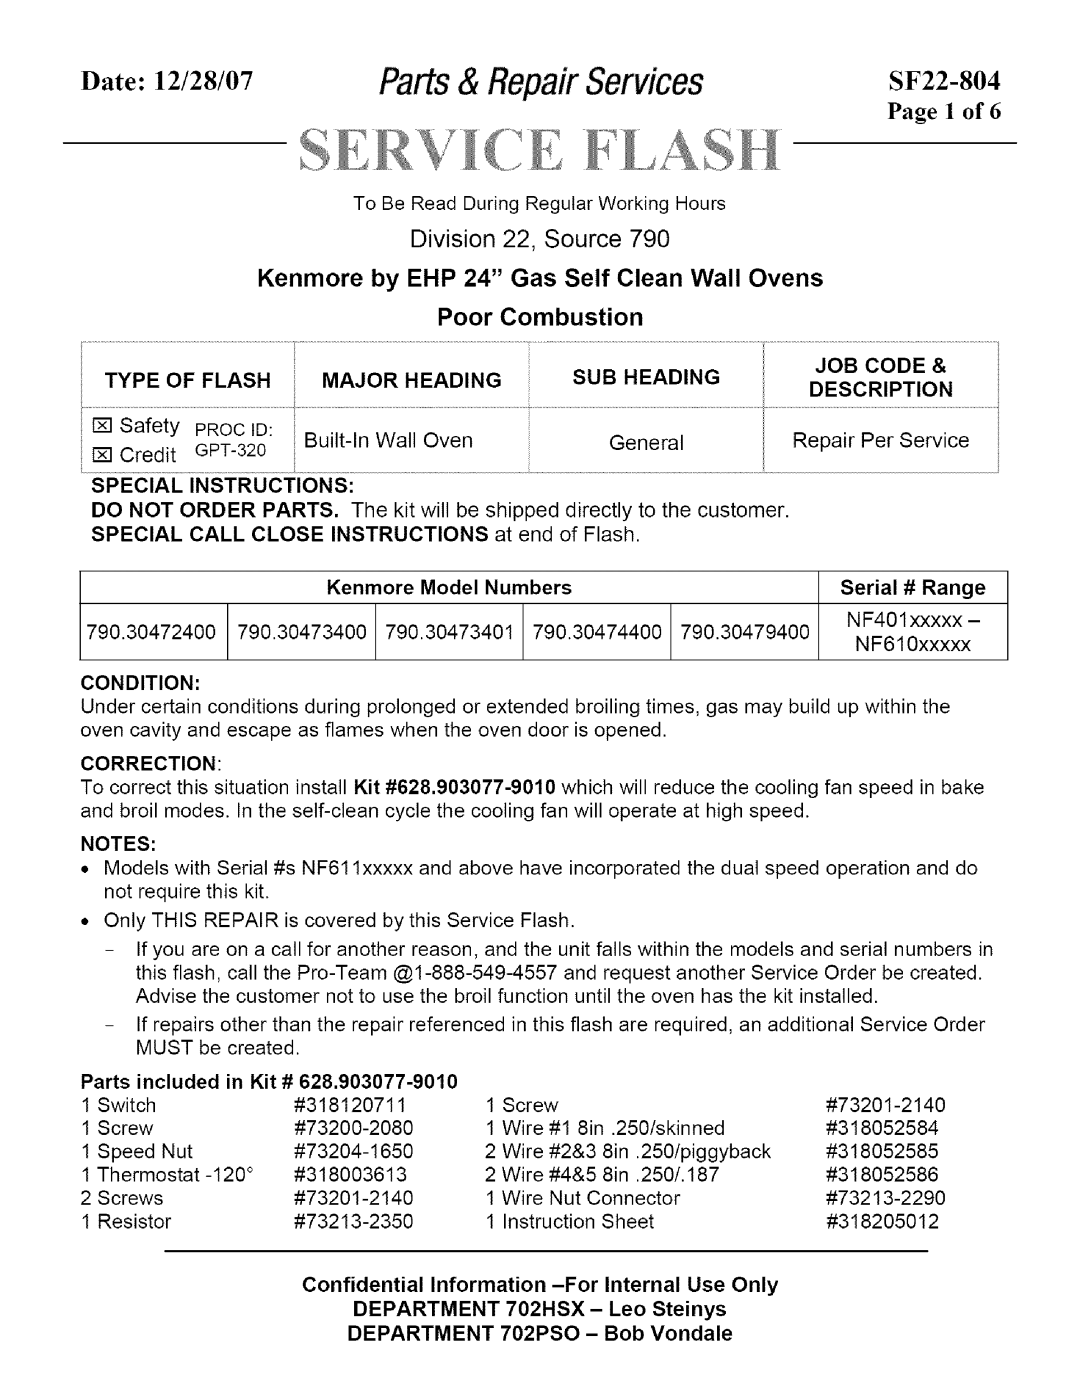 Kenmore SF22-804 instruction sheet Parts& RepairServices, Date 12/28/07, Confidential Information -ForInternal Use Only 